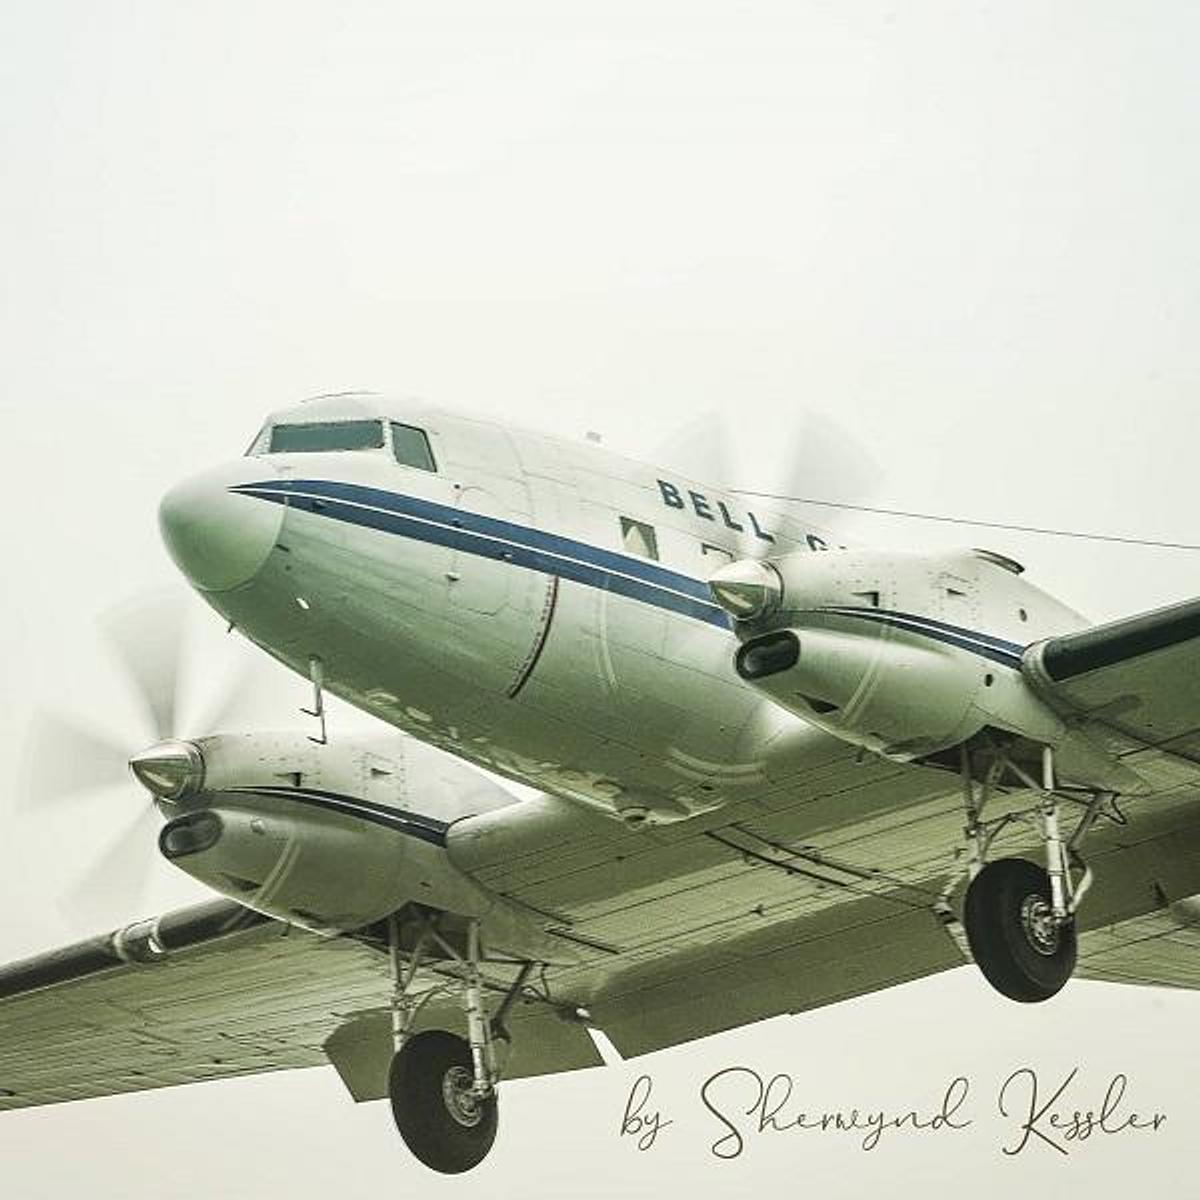 Our Aircraft - The BT-67